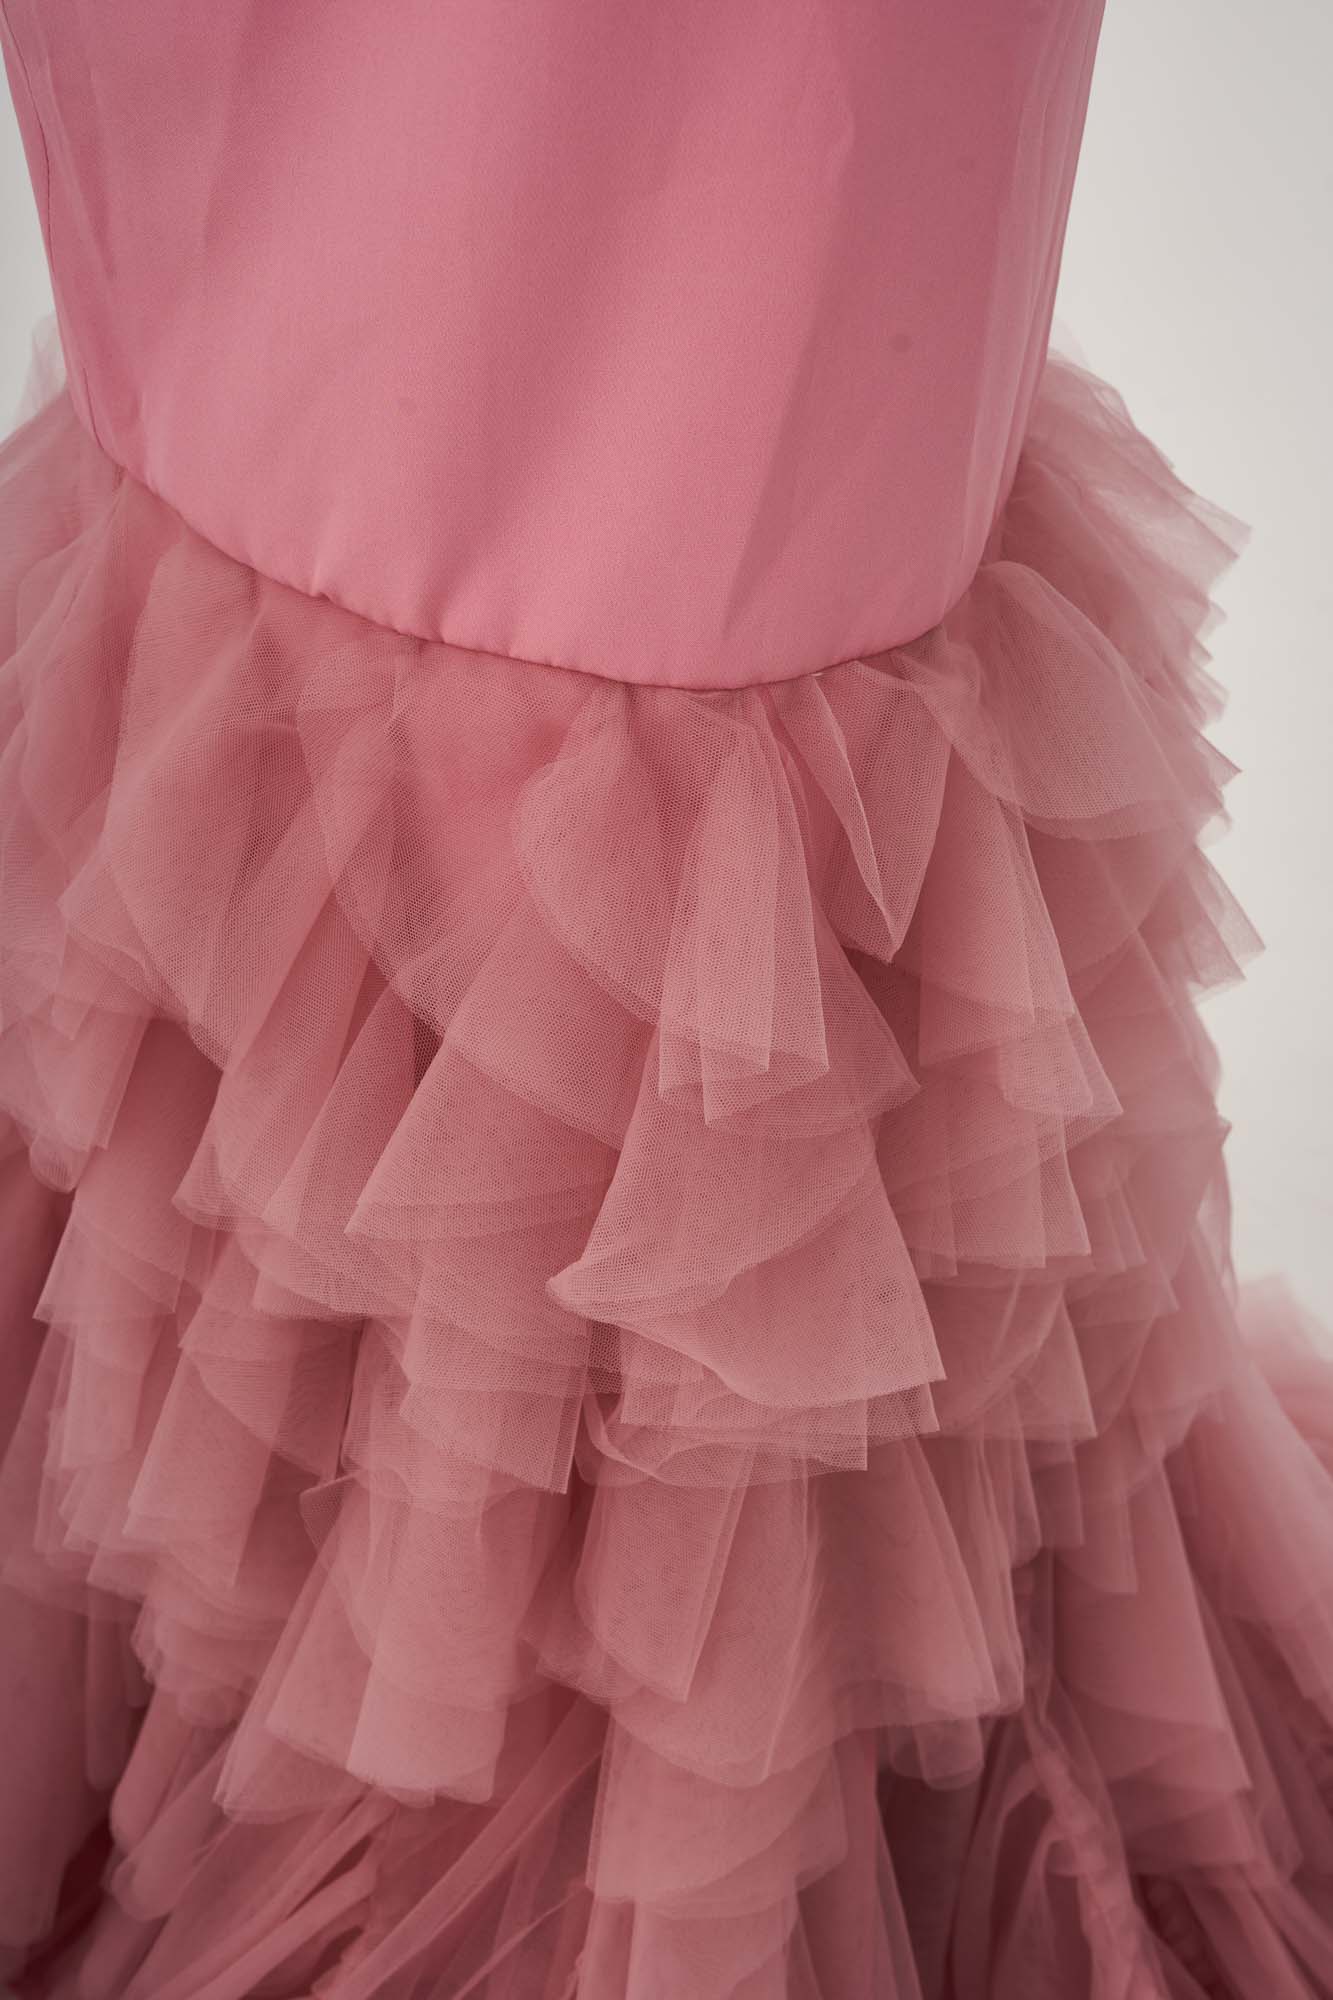 Detailed photos of pink cake maternity skirt